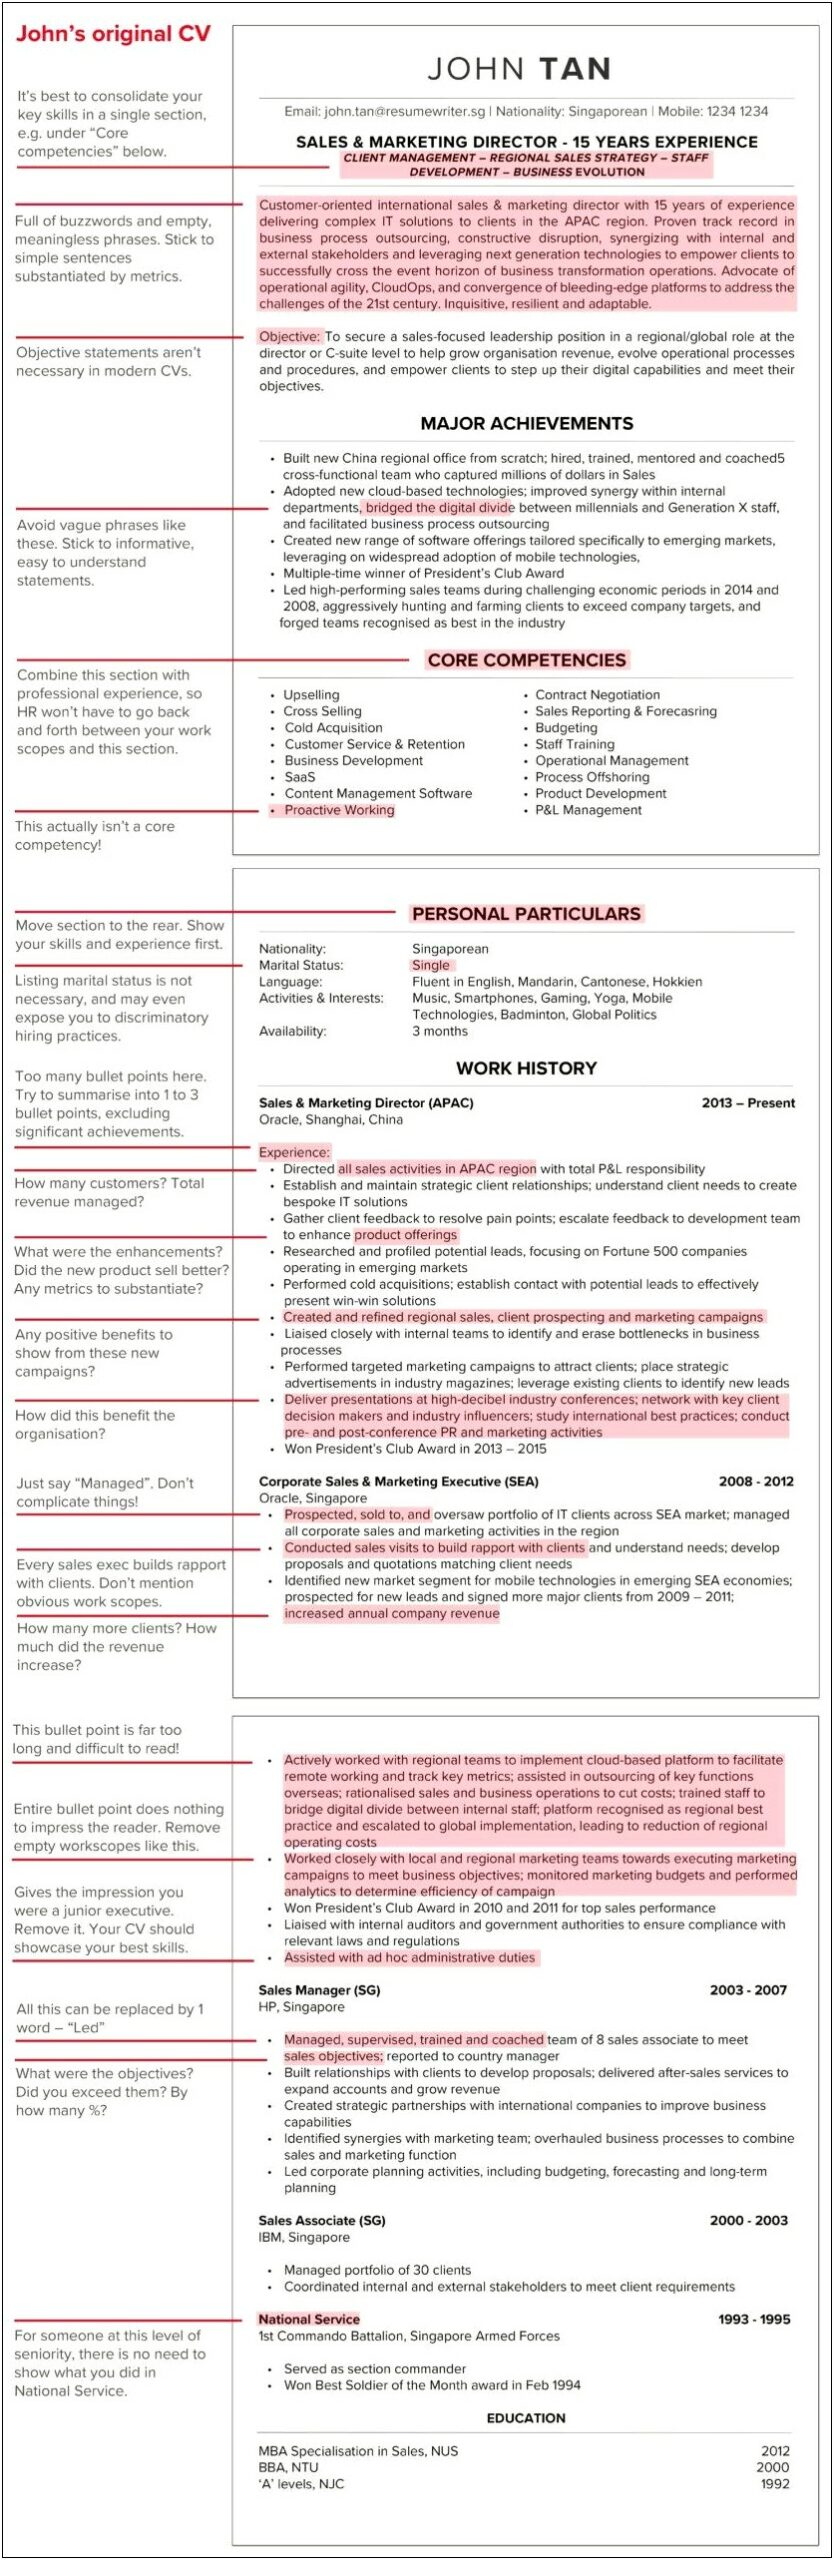 Resume Writing If You Don't Have Word